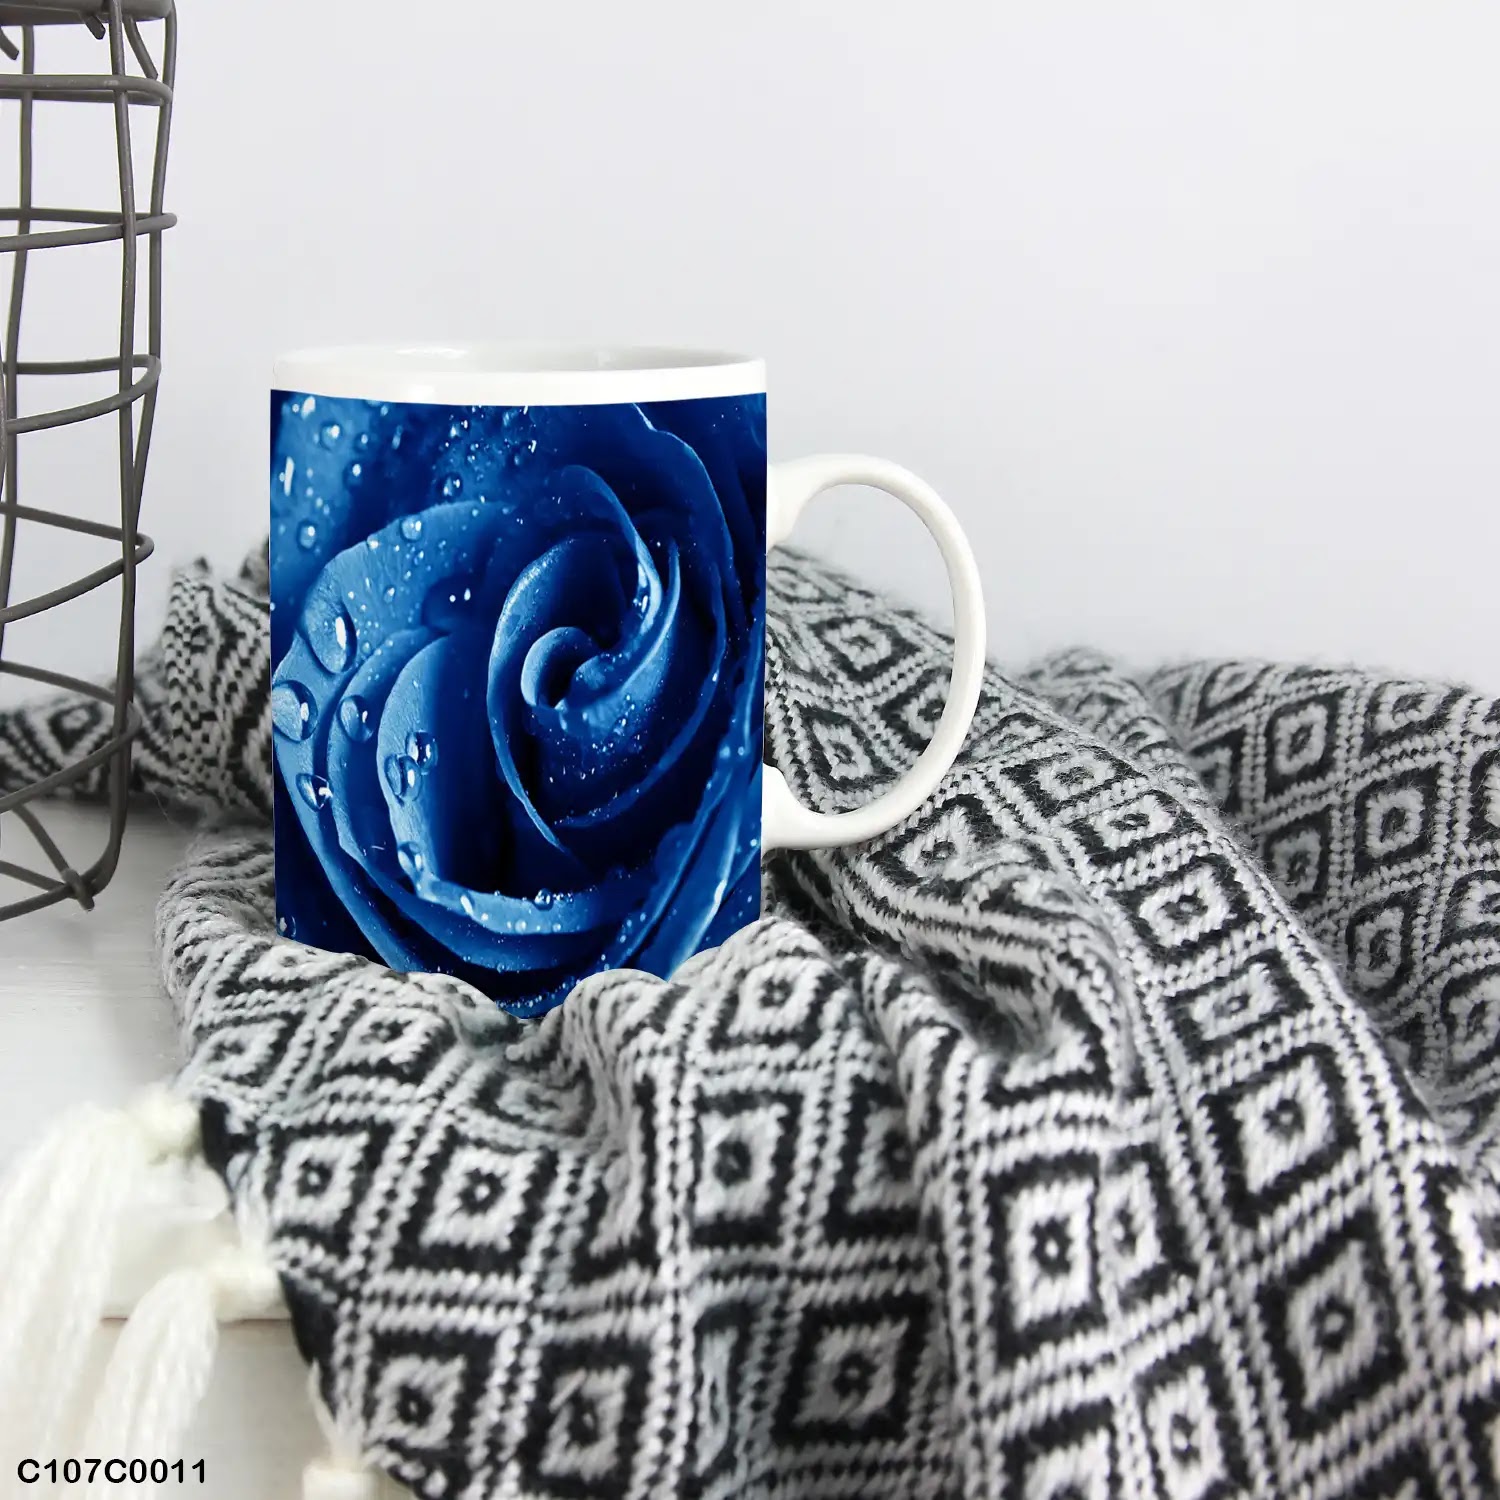 A mug (cup) printed with an image of a blue rose